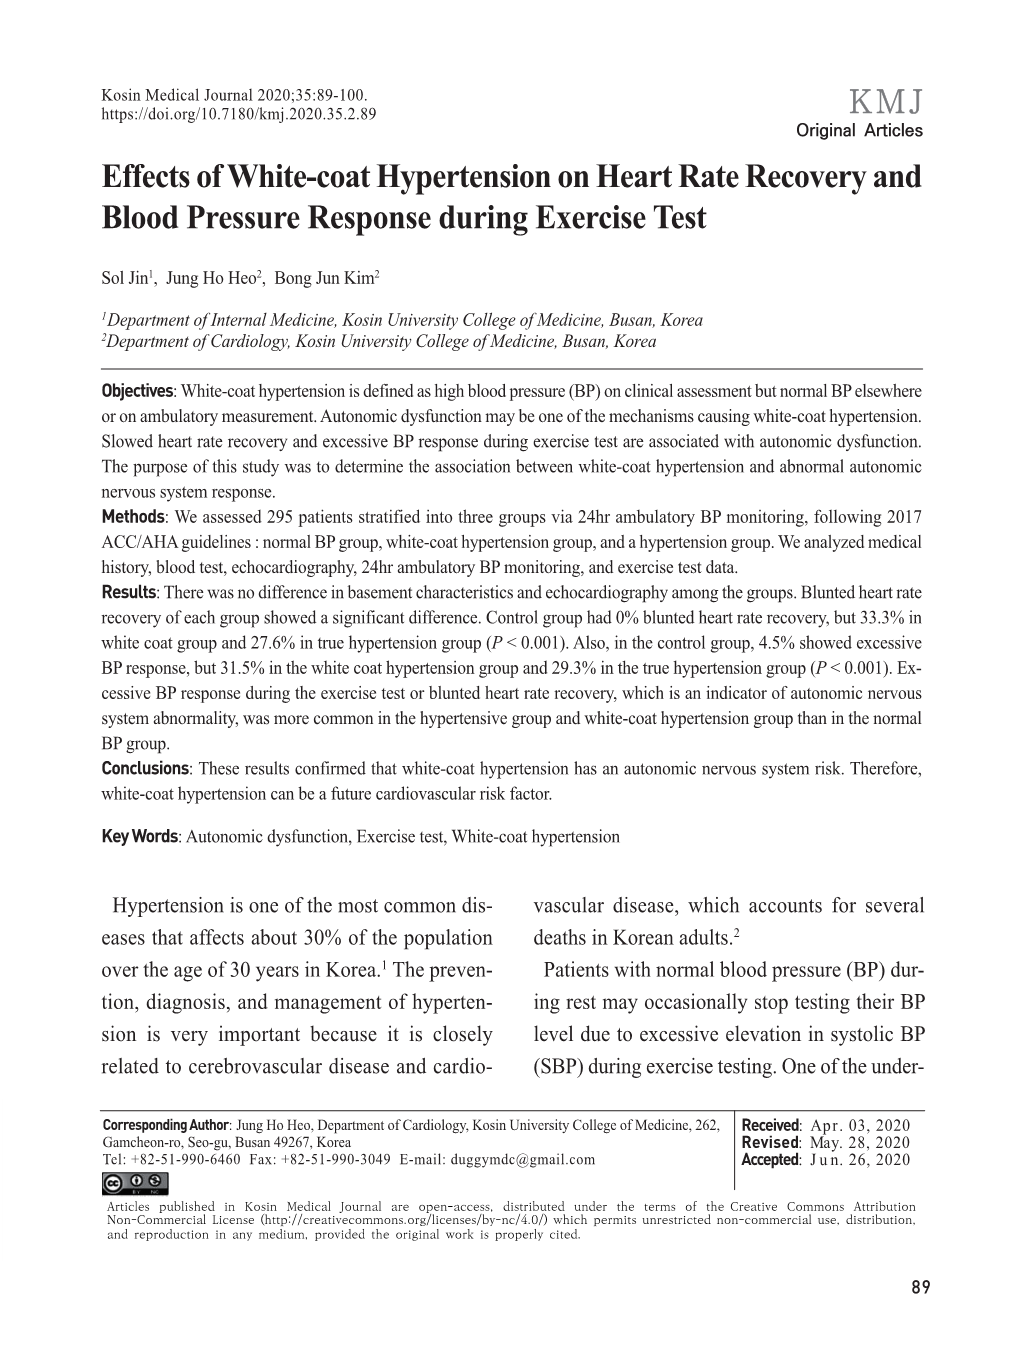 Effects of White-Coat Hypertension on Heart Rate Recovery and Blood Pressure Response During Exercise Test